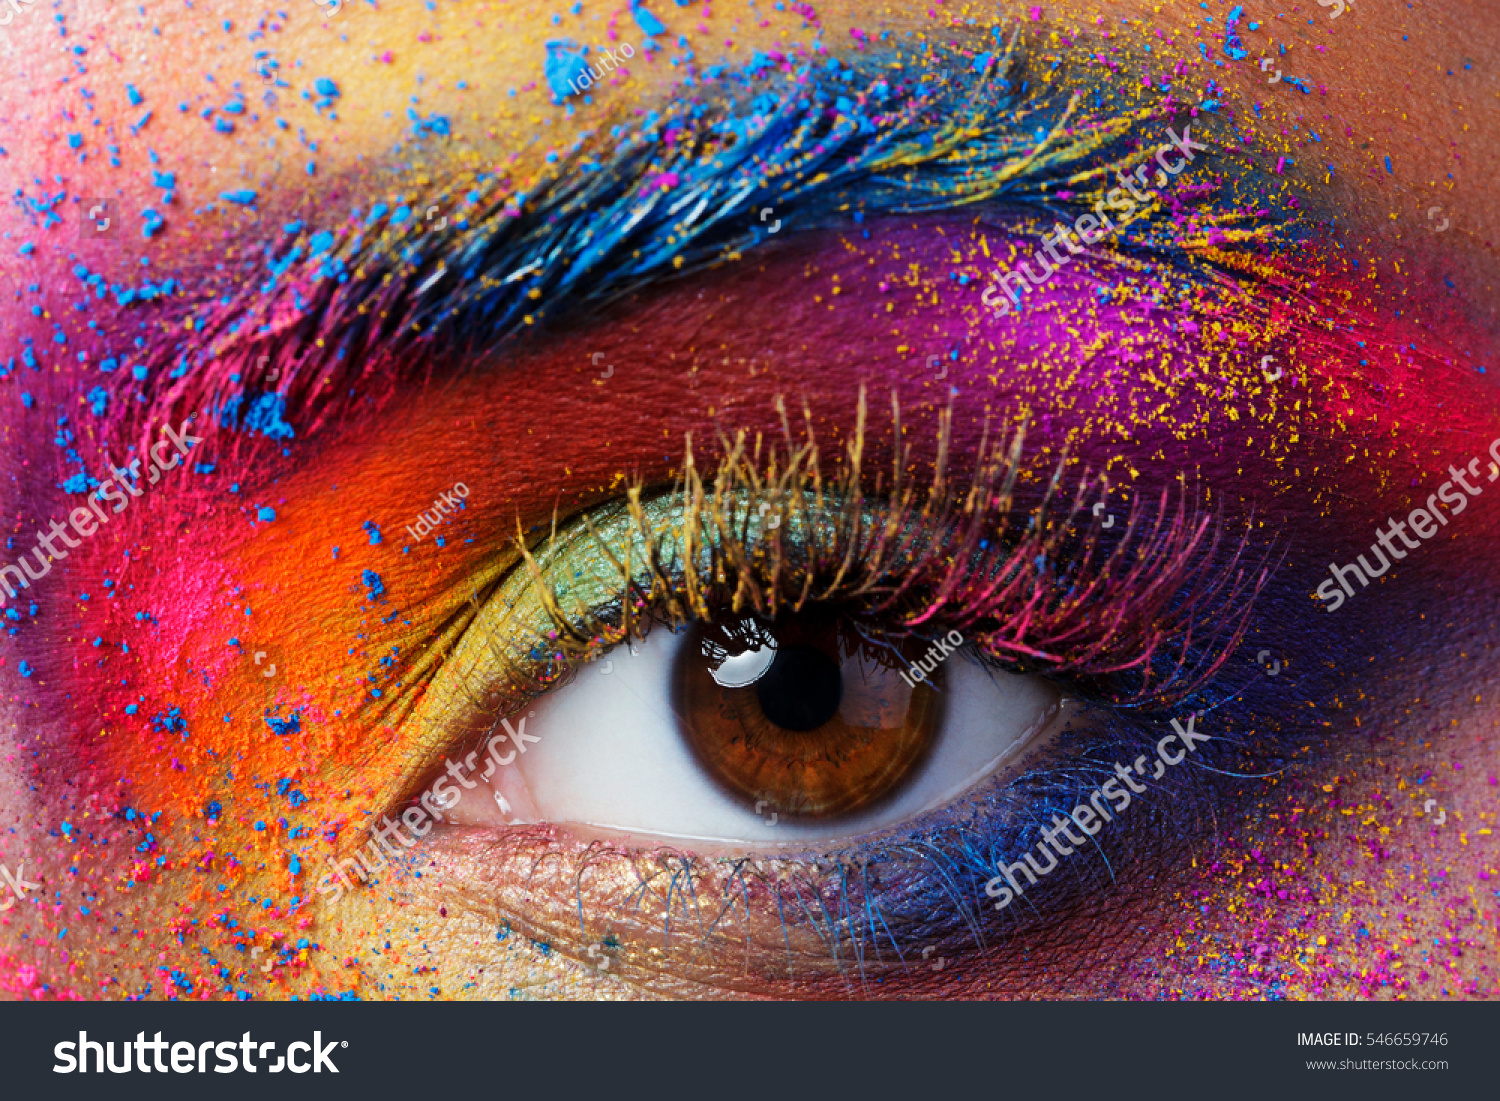 Close up view of female eye with bright multicolored fashion makeup. Holi indian color festival inspired. Studio macro shot #546659746